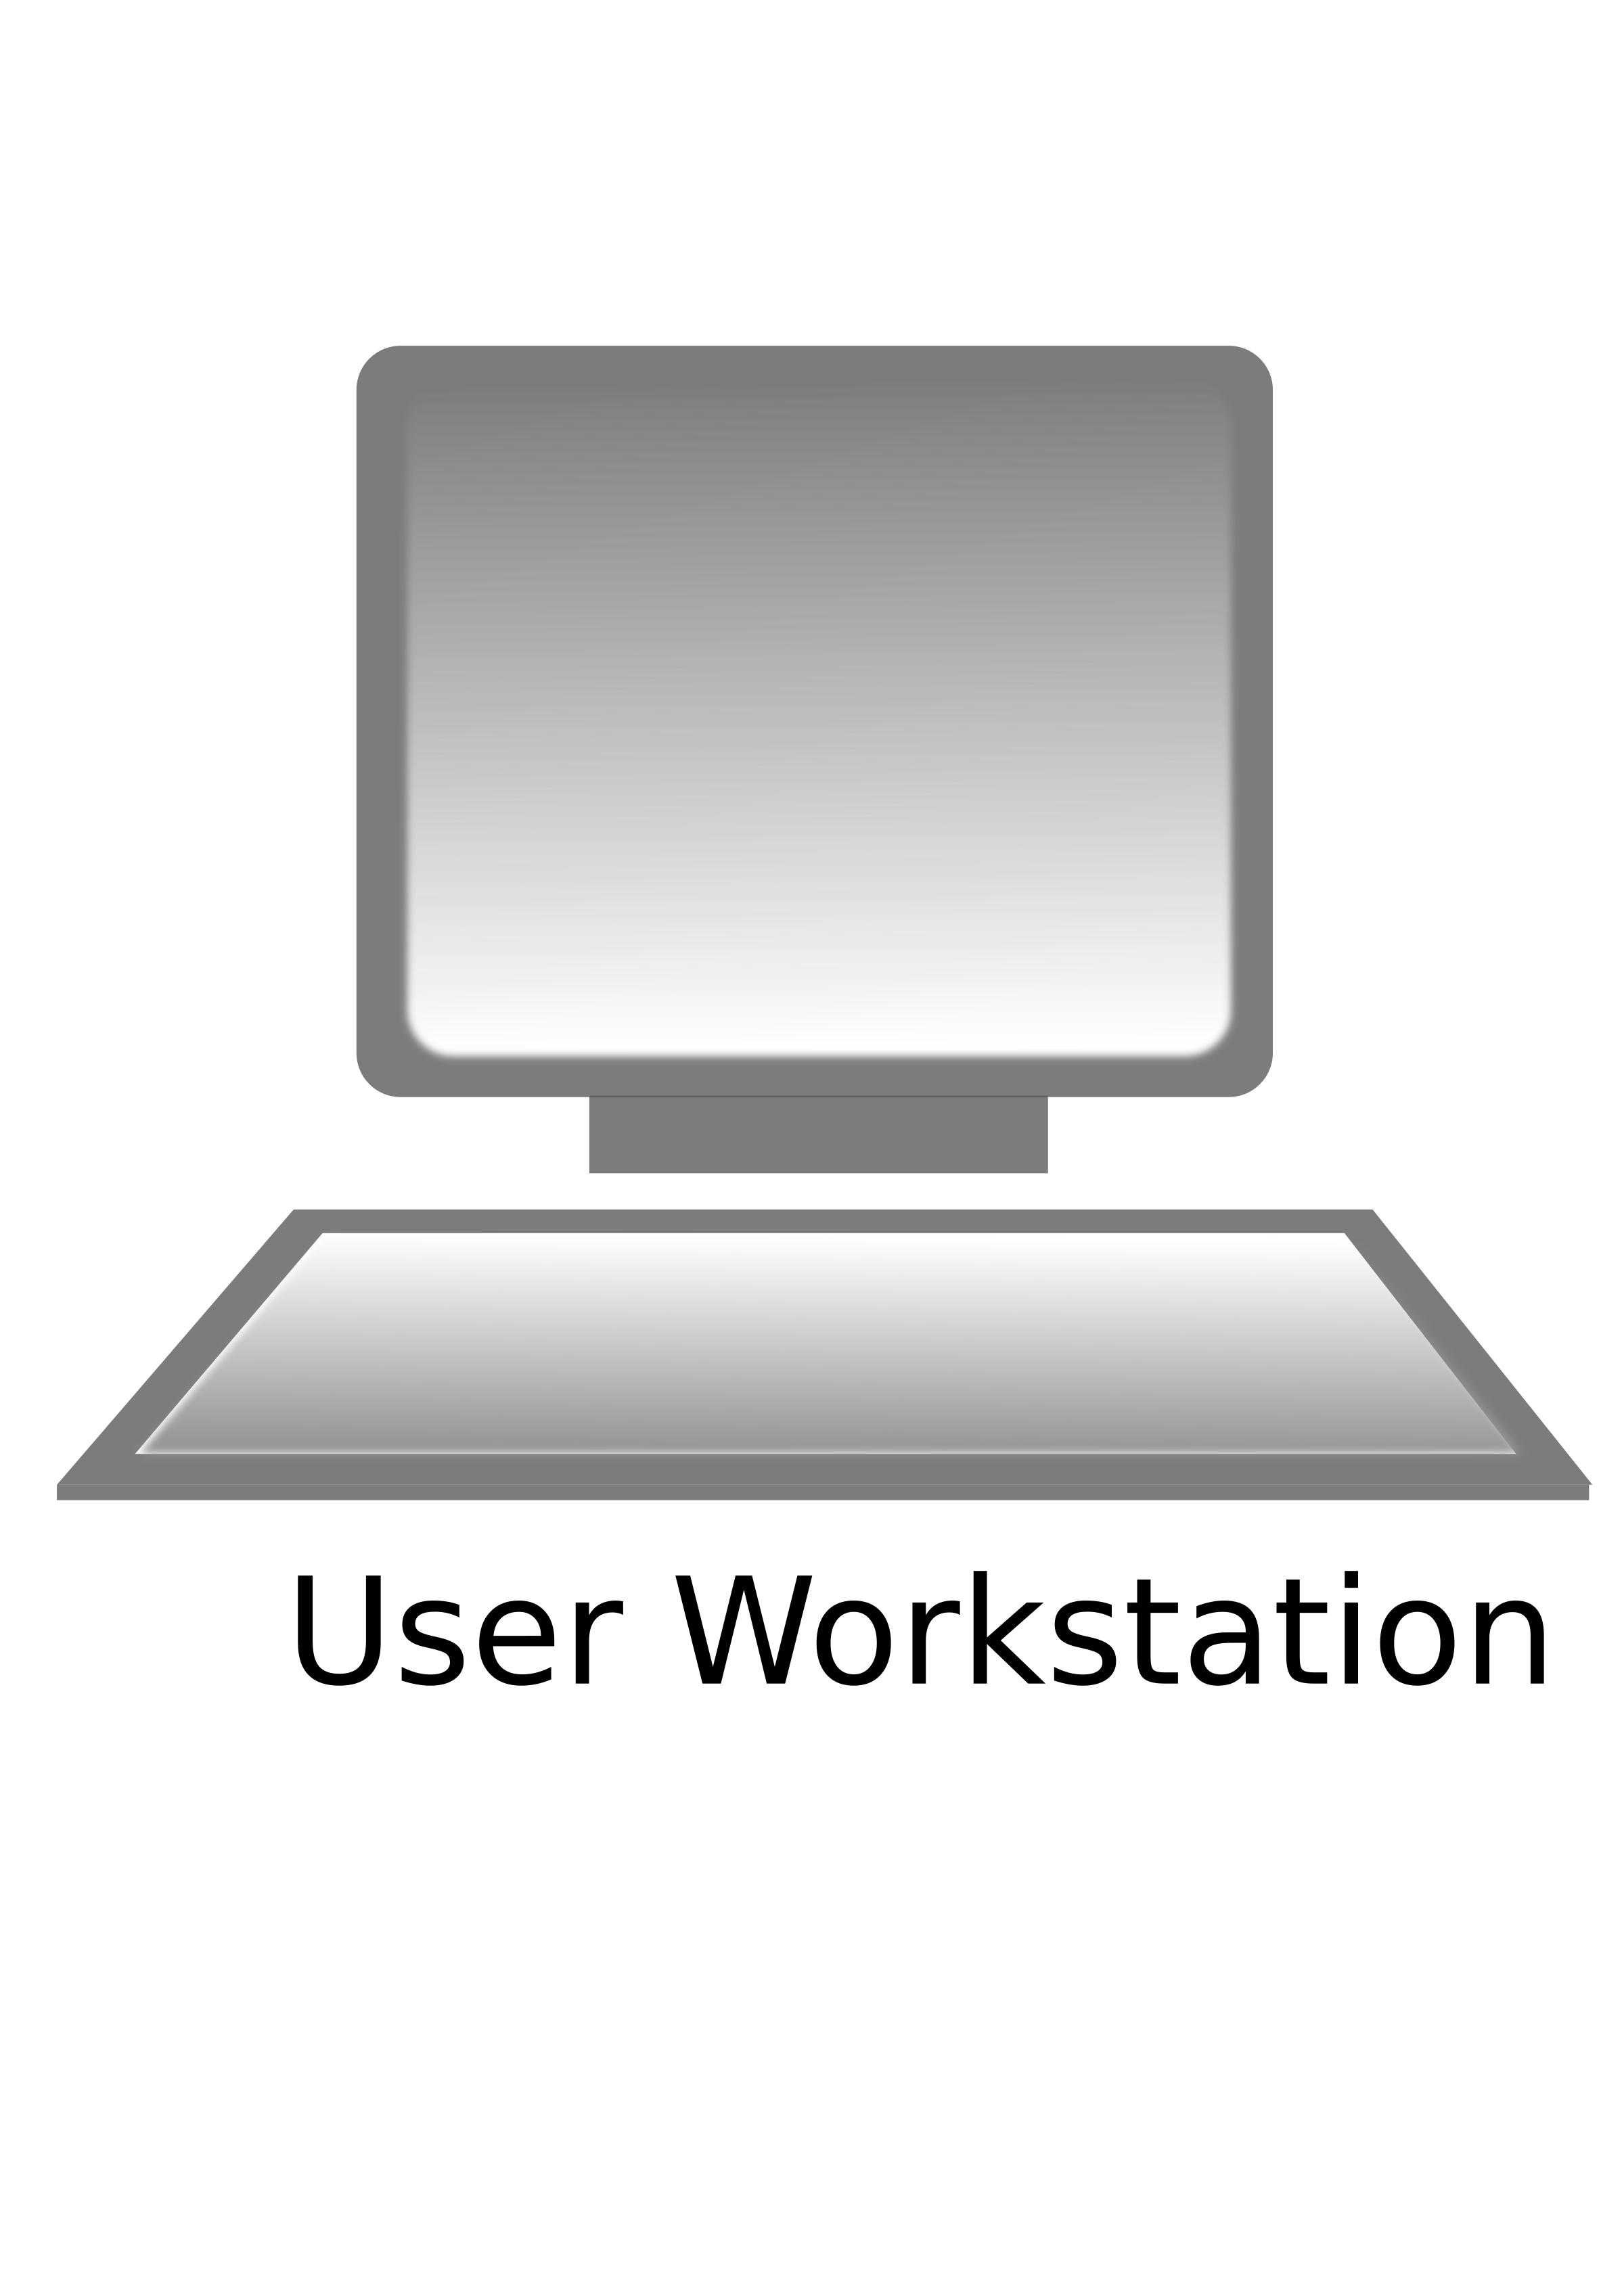 User Workstation icons